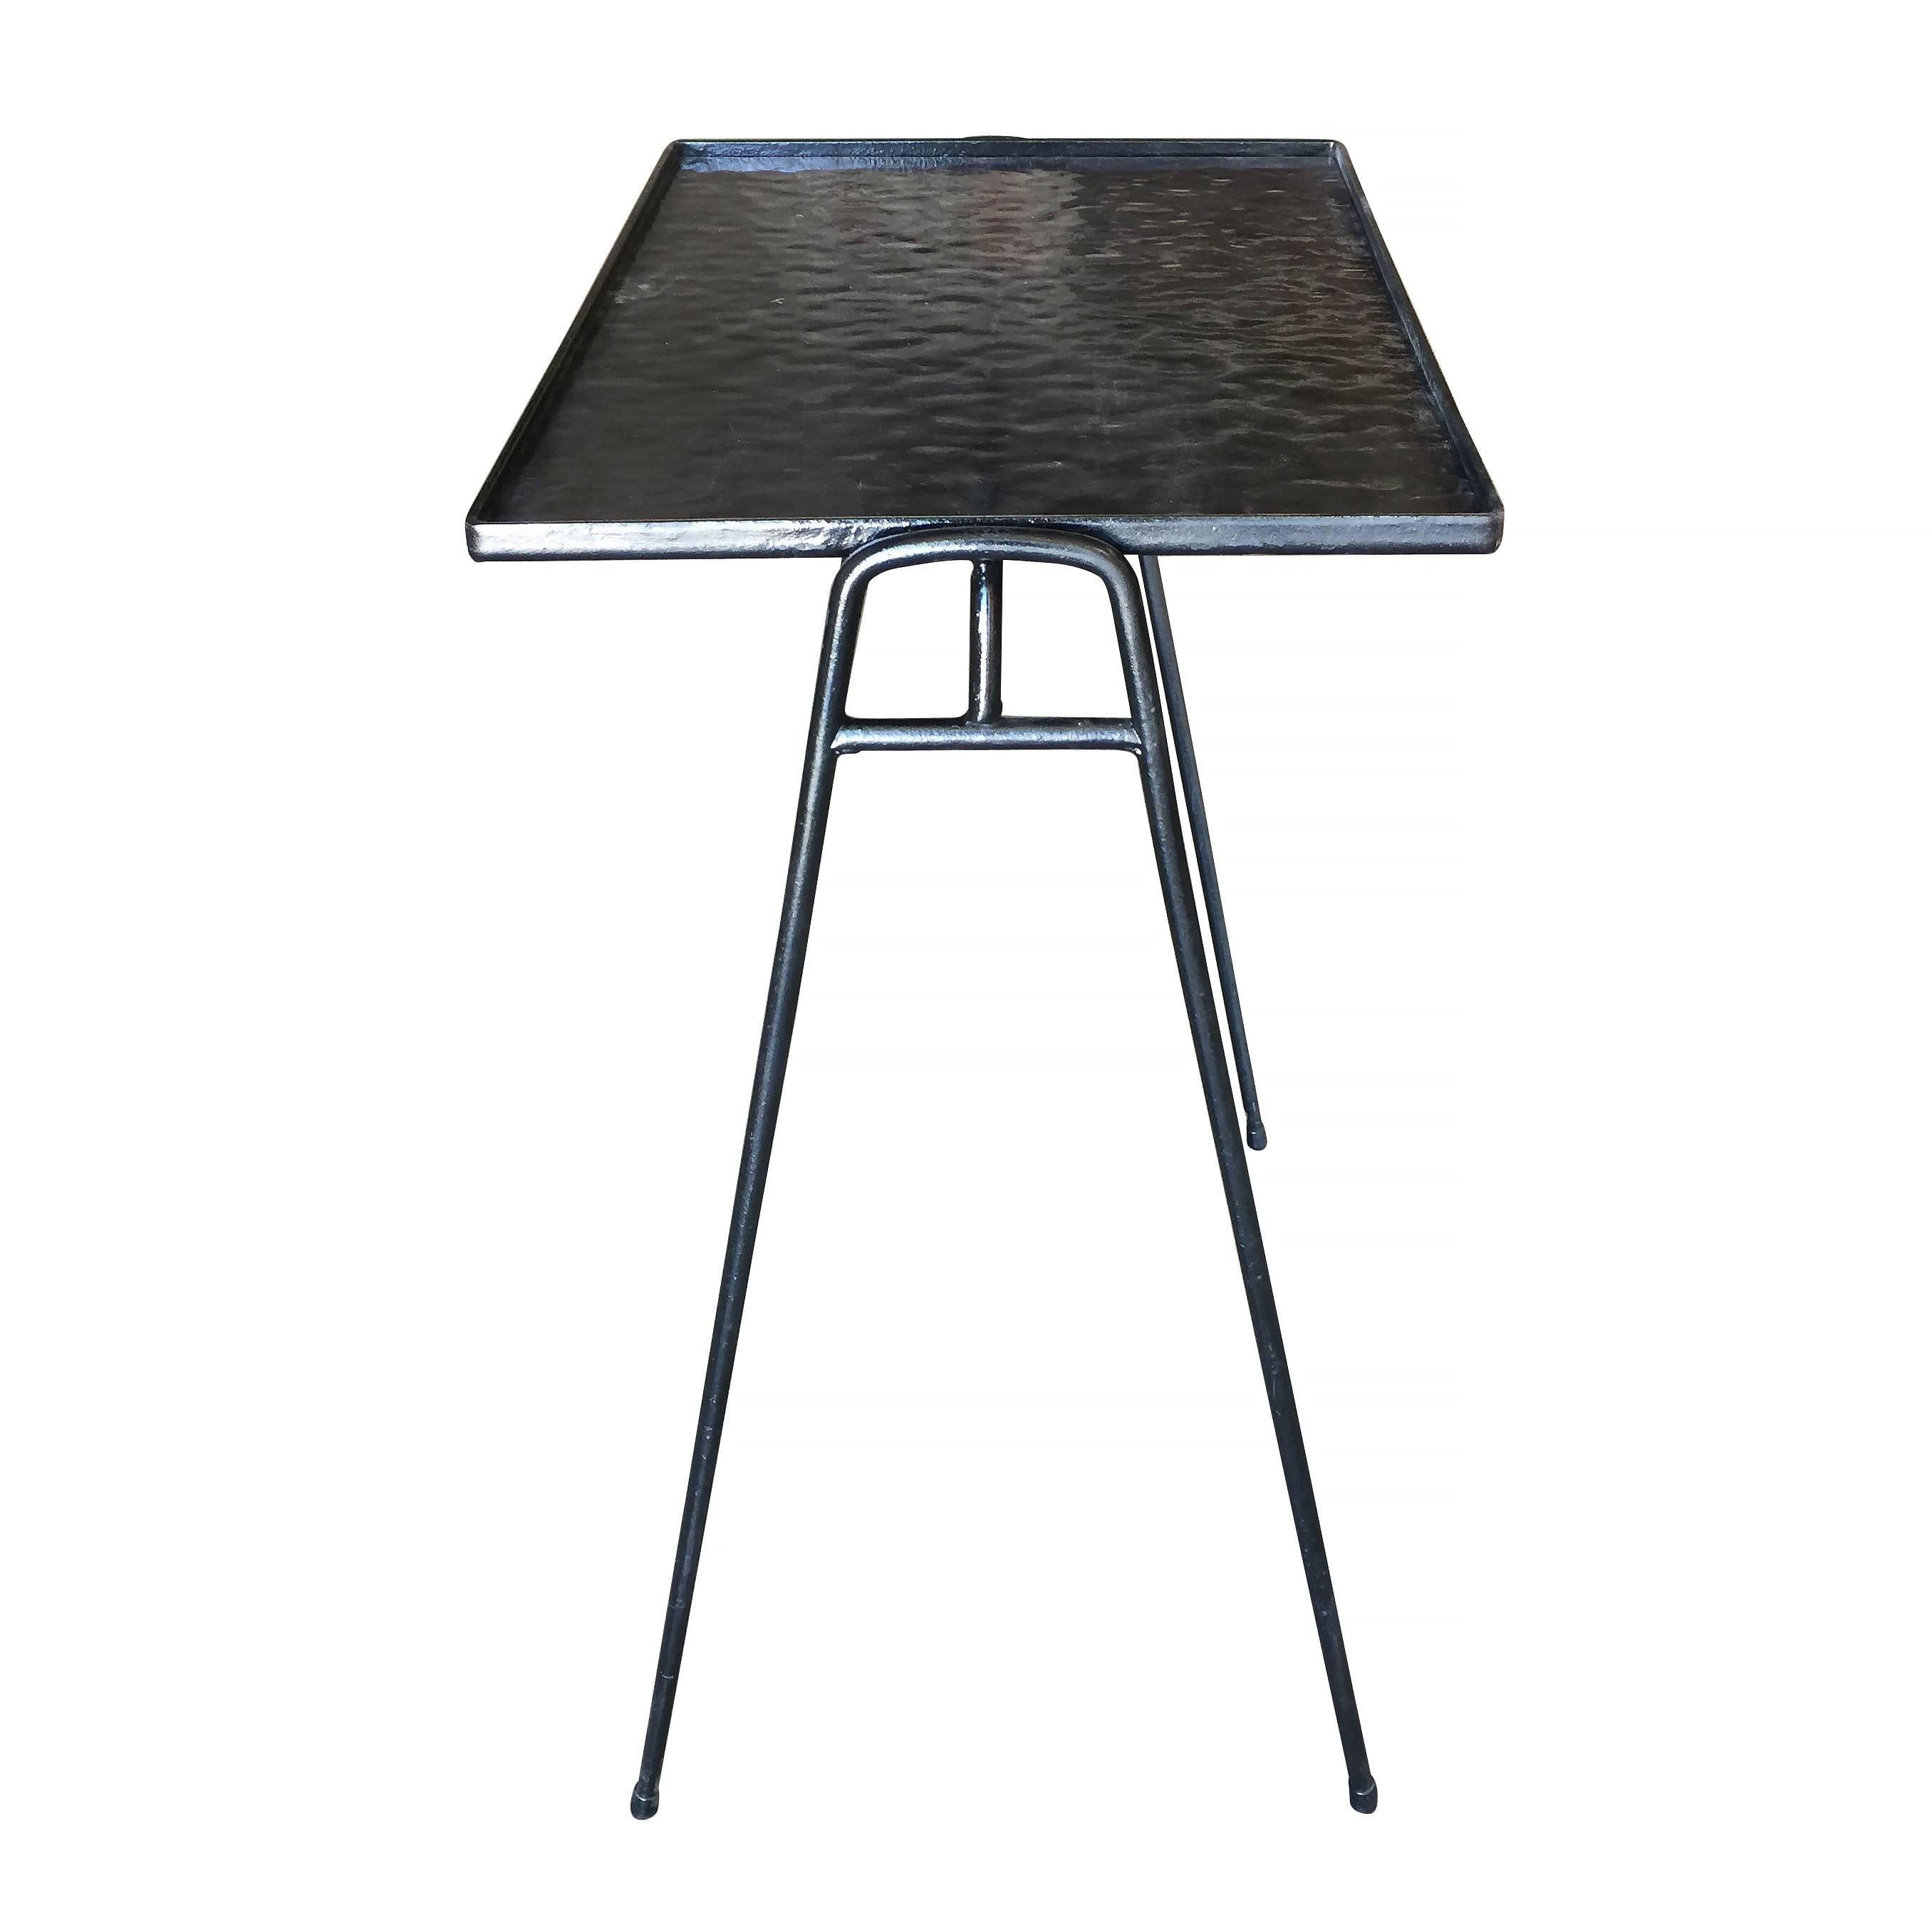 Set of three Frederic Weinberg style stackable side tables with iron hairpin legs and acrylic tops.

Measurements:
24.5